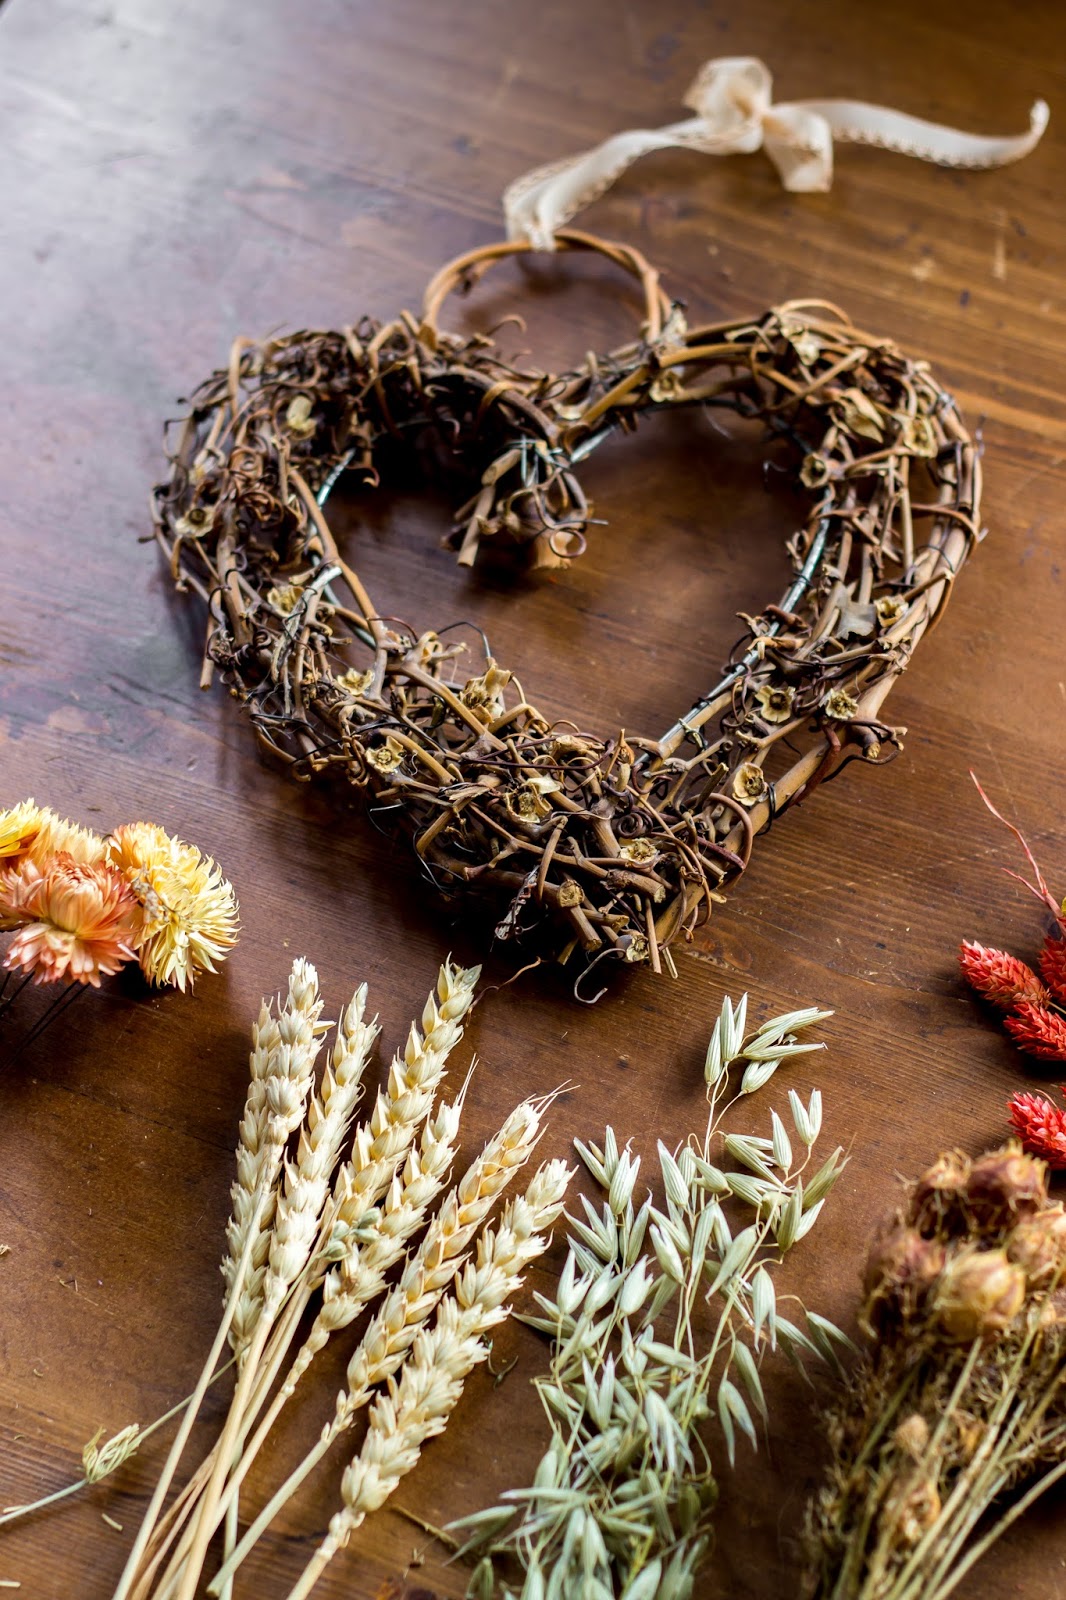 10 Minutes or Less: DIY Heart Wreath - The Crafted Life